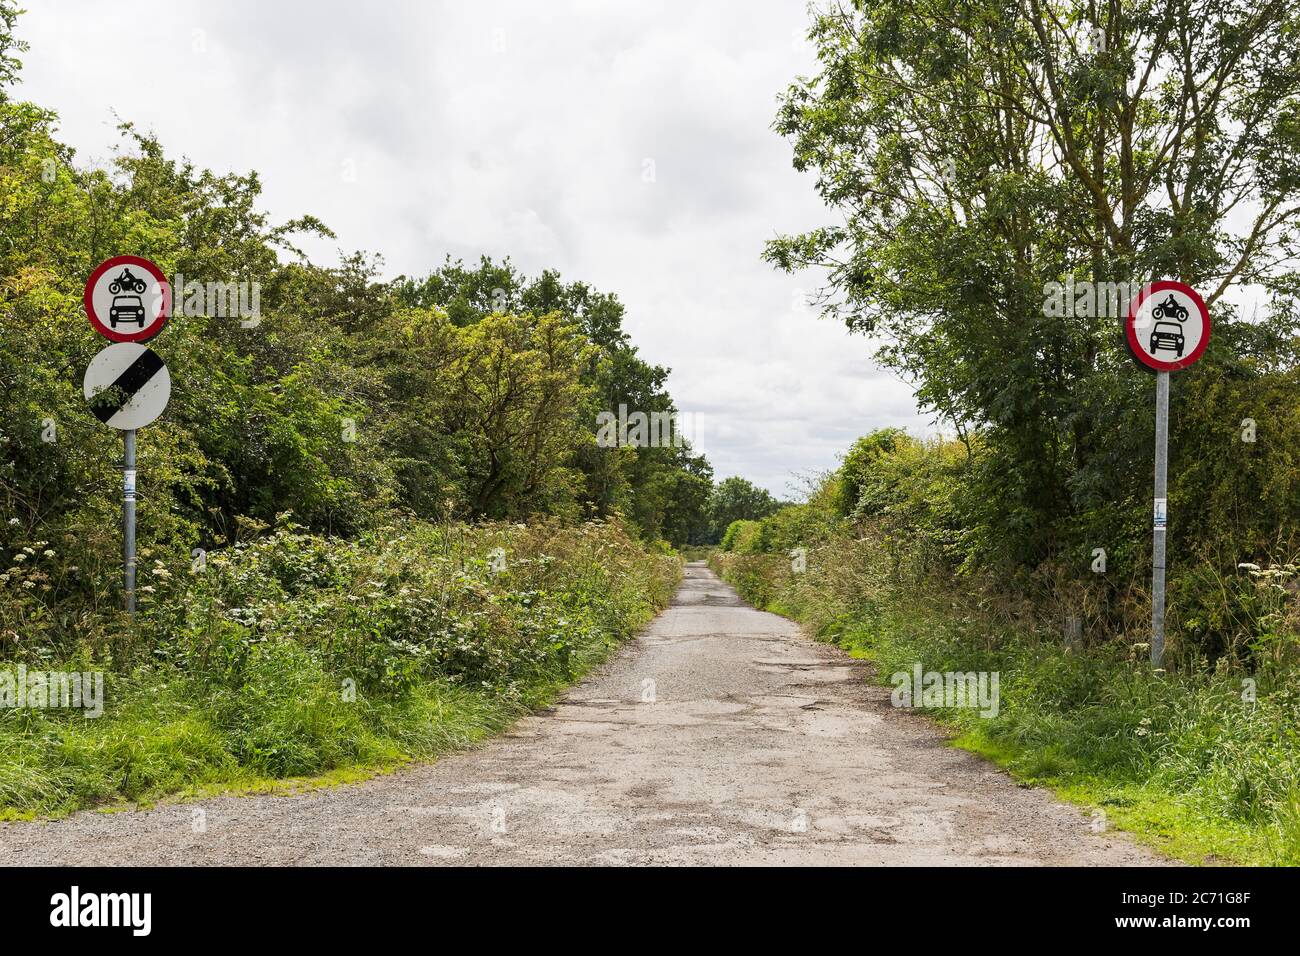 A no motor vehicle sign with a national speed limit sign on a country lane, UK Stock Photo